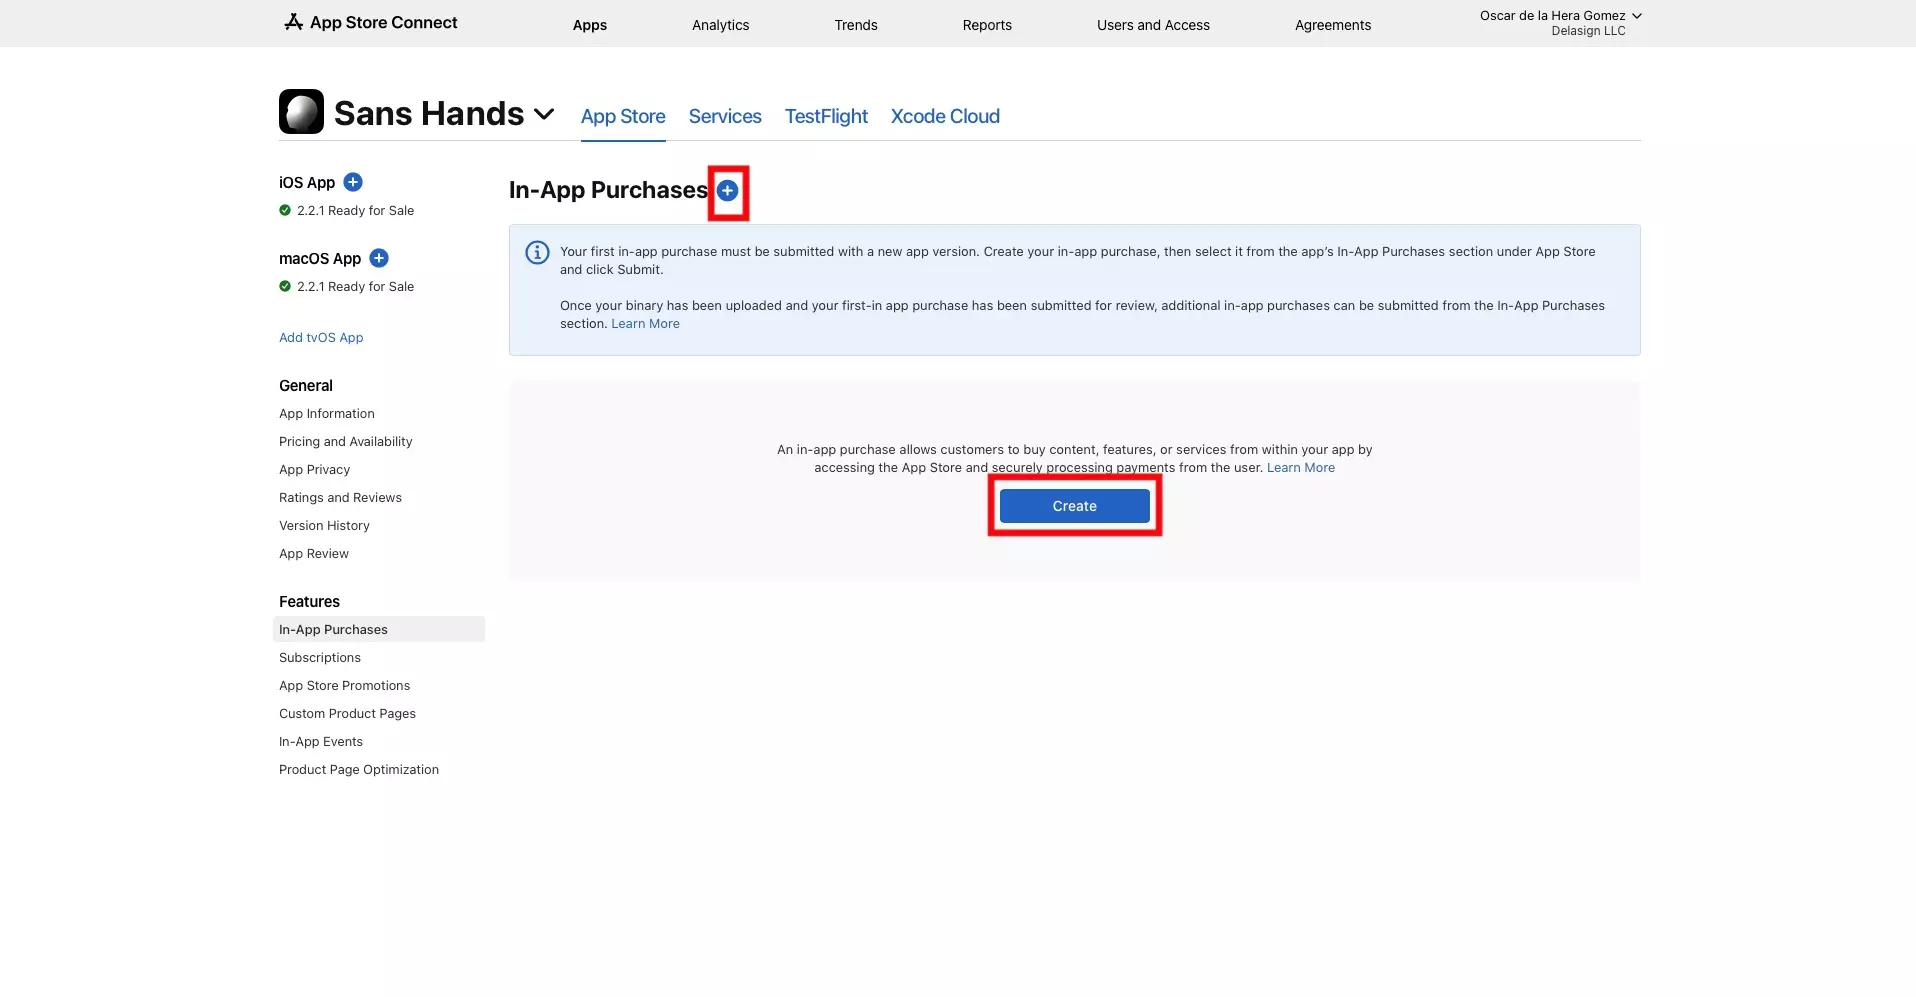 A screenshot of the In-App Purchases page for Sans Hands. Highlighted is the "+" button and the "Create" button which allow you to create new in-app purchases. Press either of these and continue to the next step.